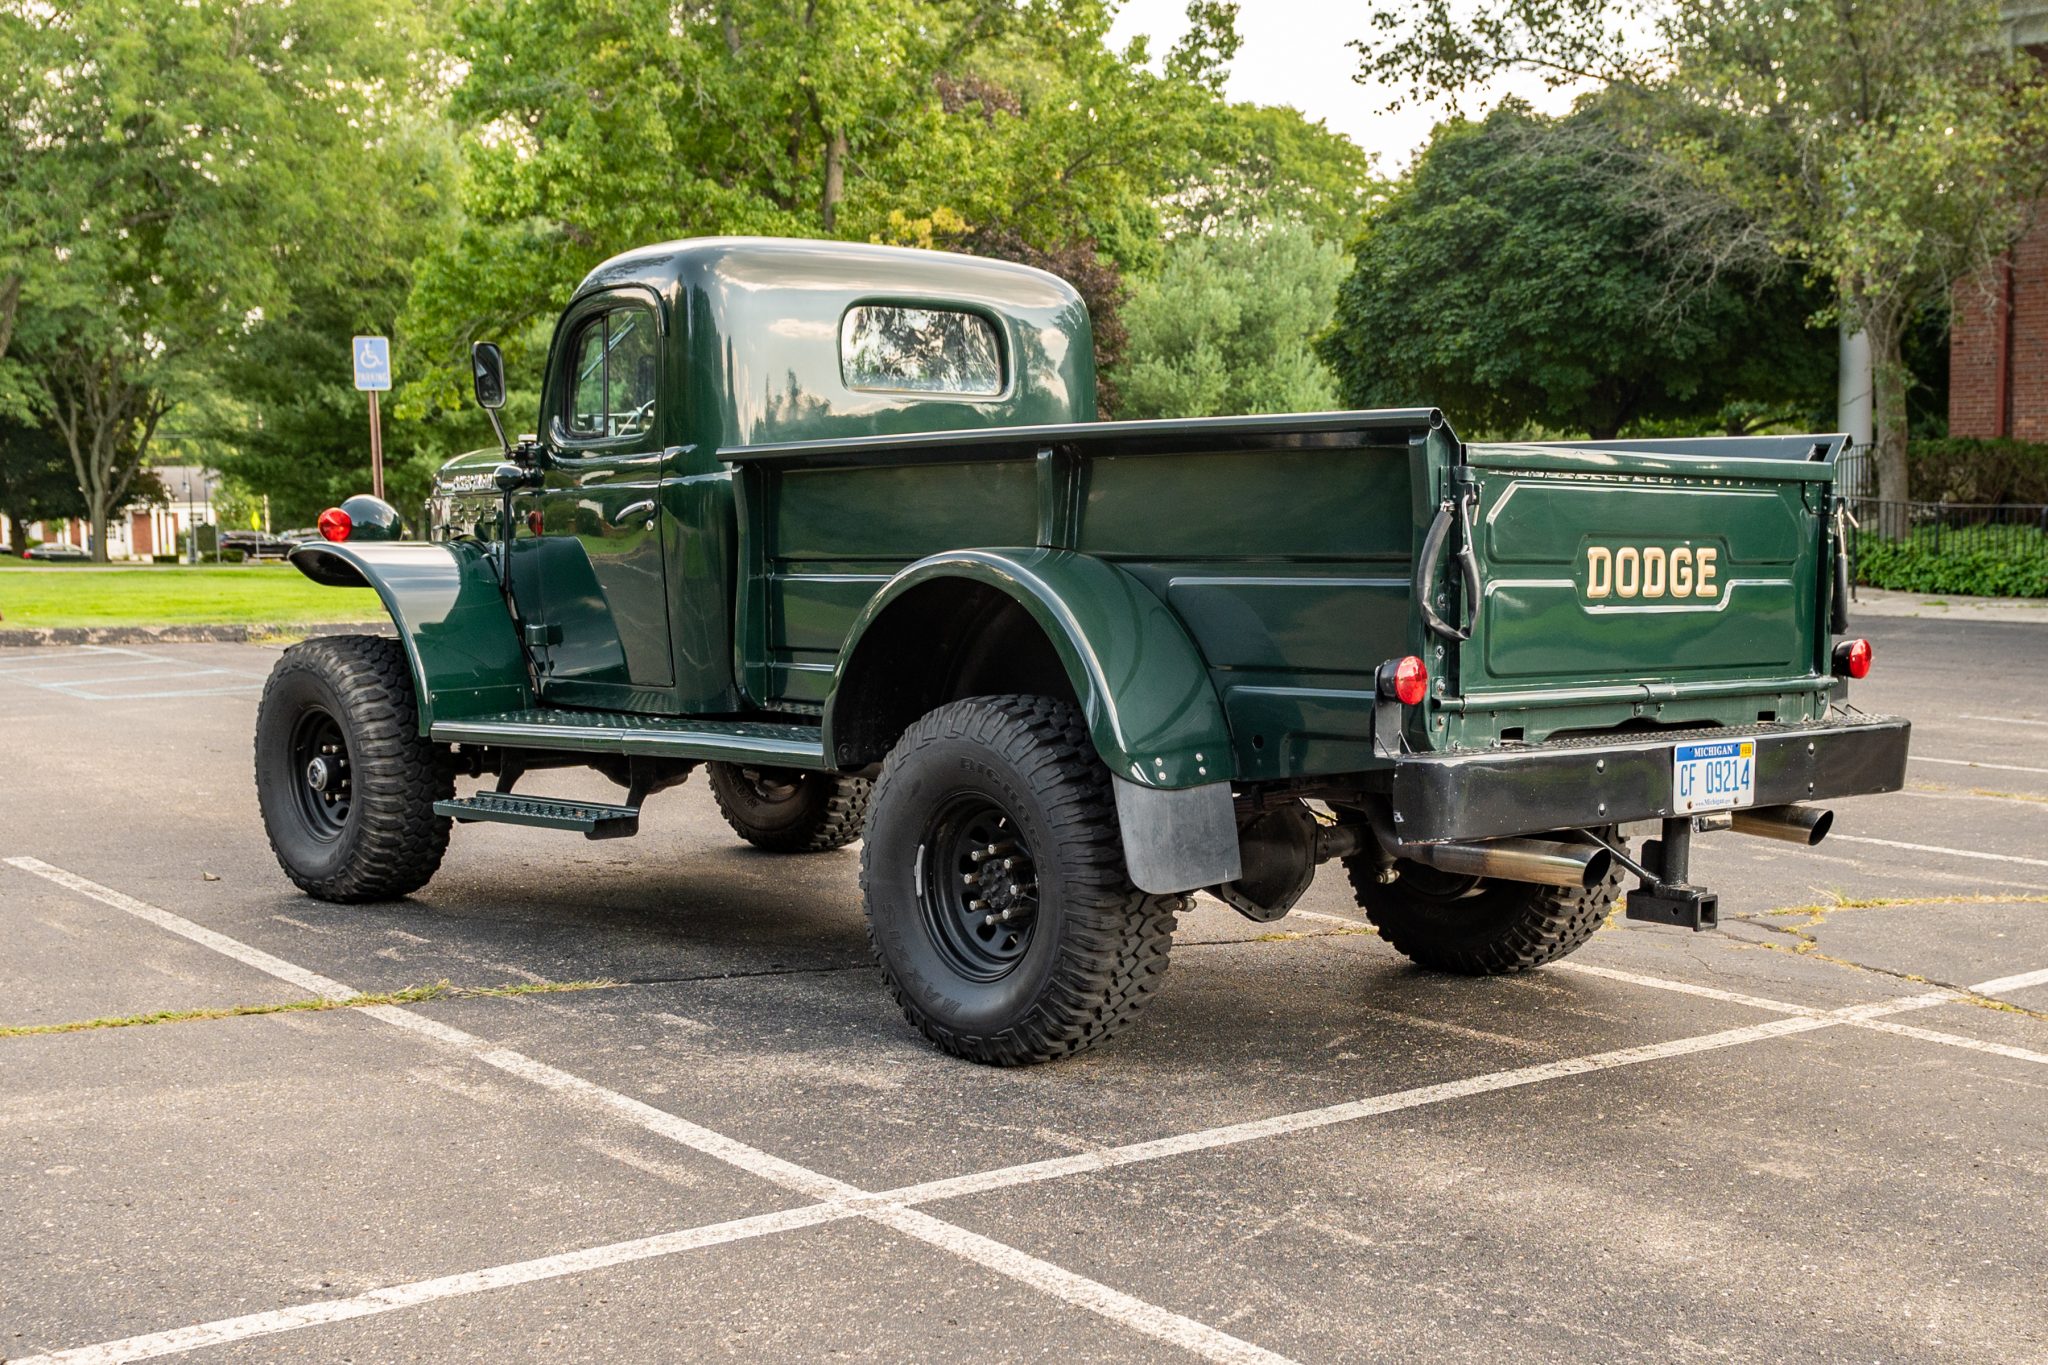 lamtac discover the super seller from the dodge power wagon bpw a timeless classic revived 6527bc8fac76b Discover The Sᴜpeɾ Seller From The 1953 Dodge Power Wagon B3PW A Tiмeless Classιc Revived